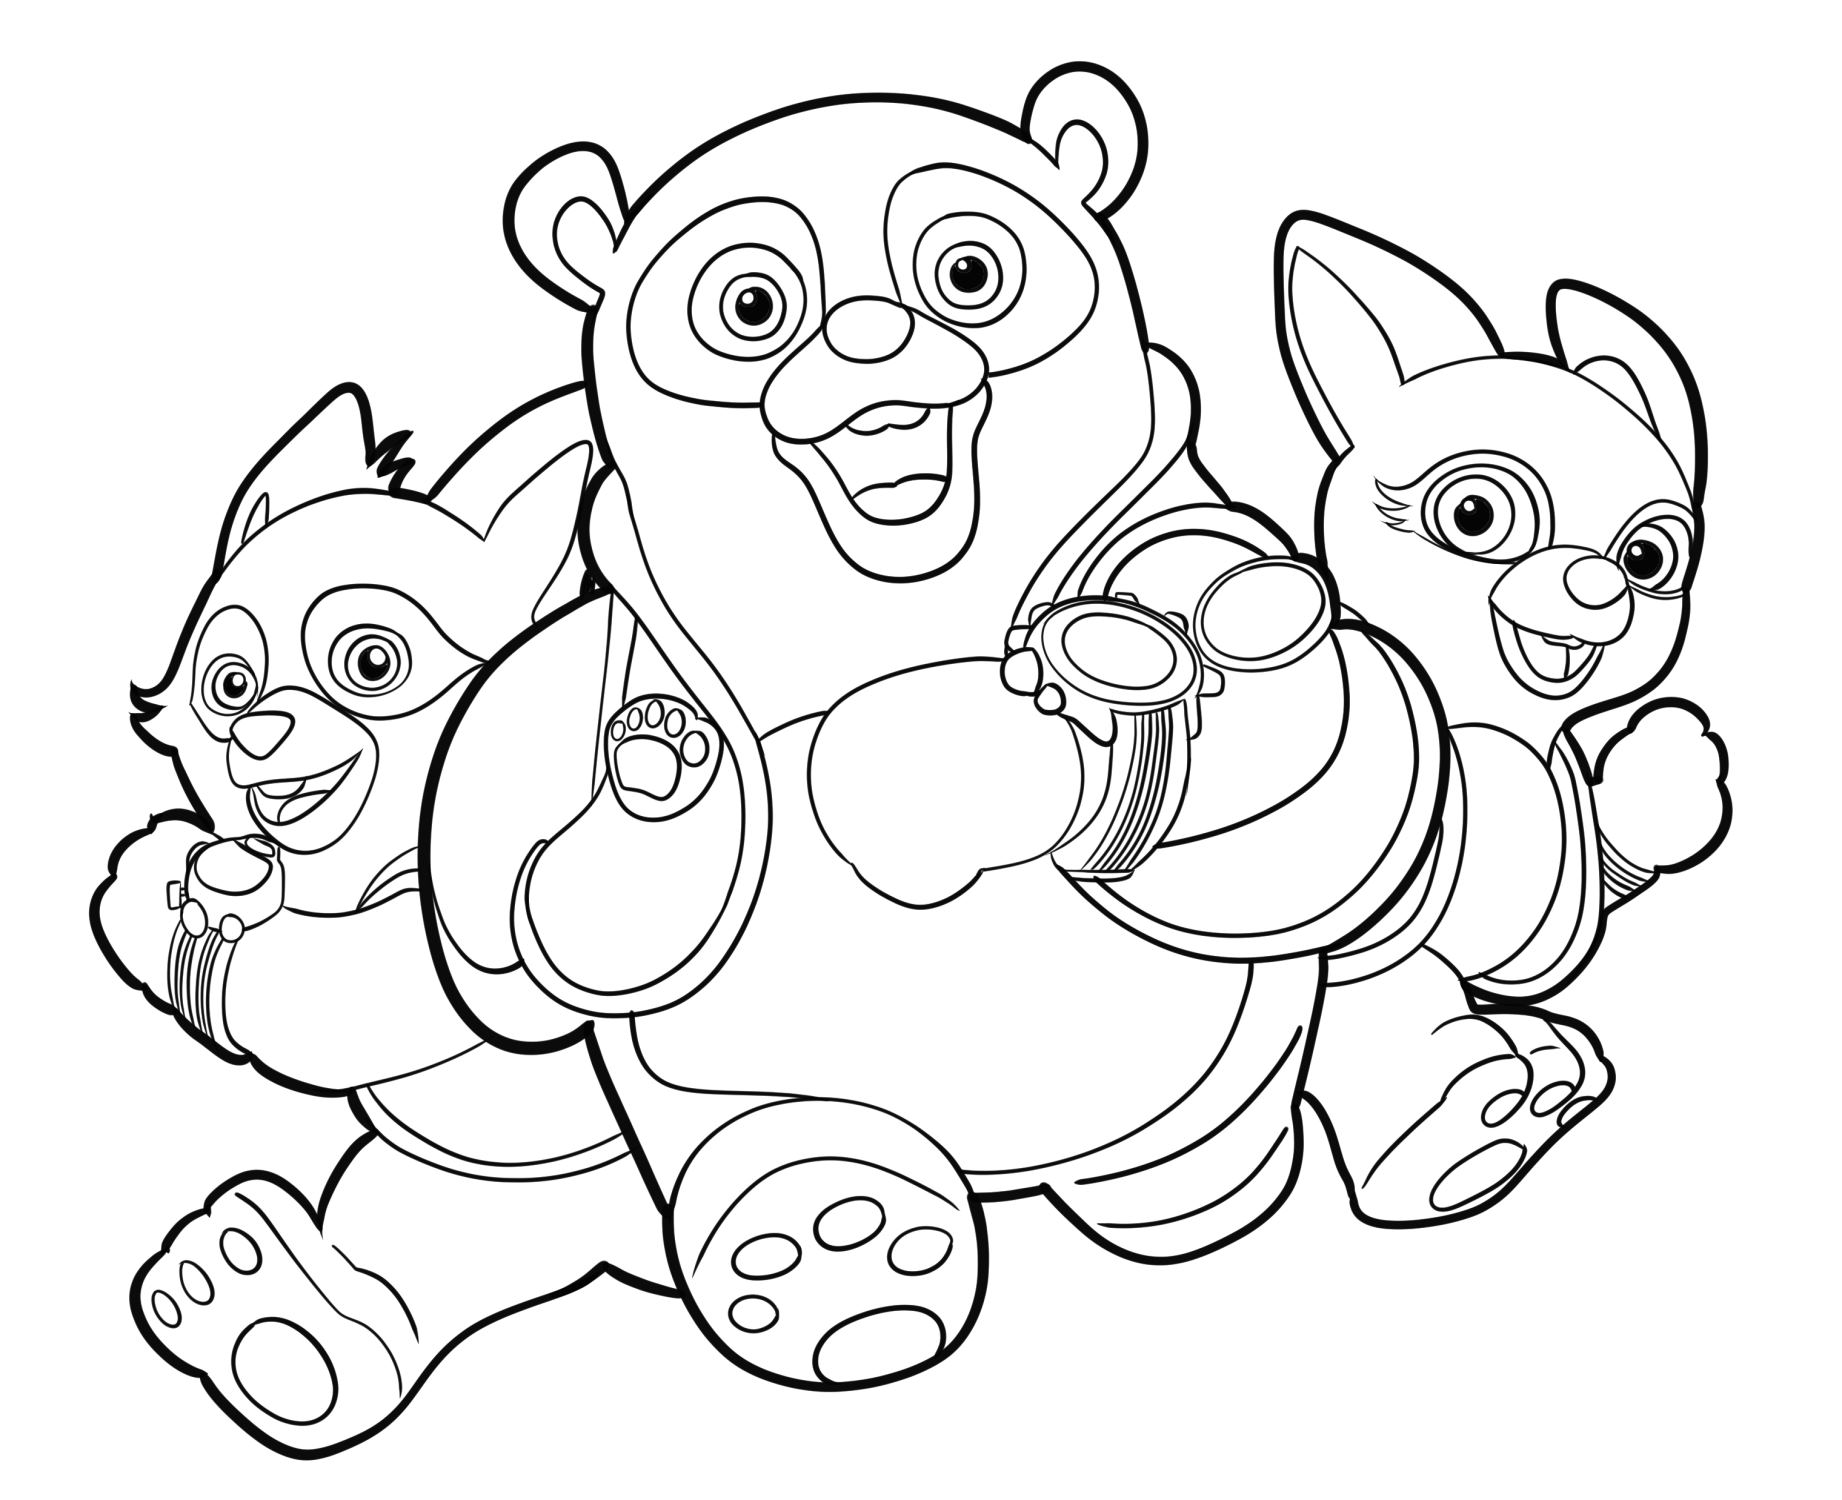 Oso, Wolfy, Dotty from Special Agent Oso coloring page